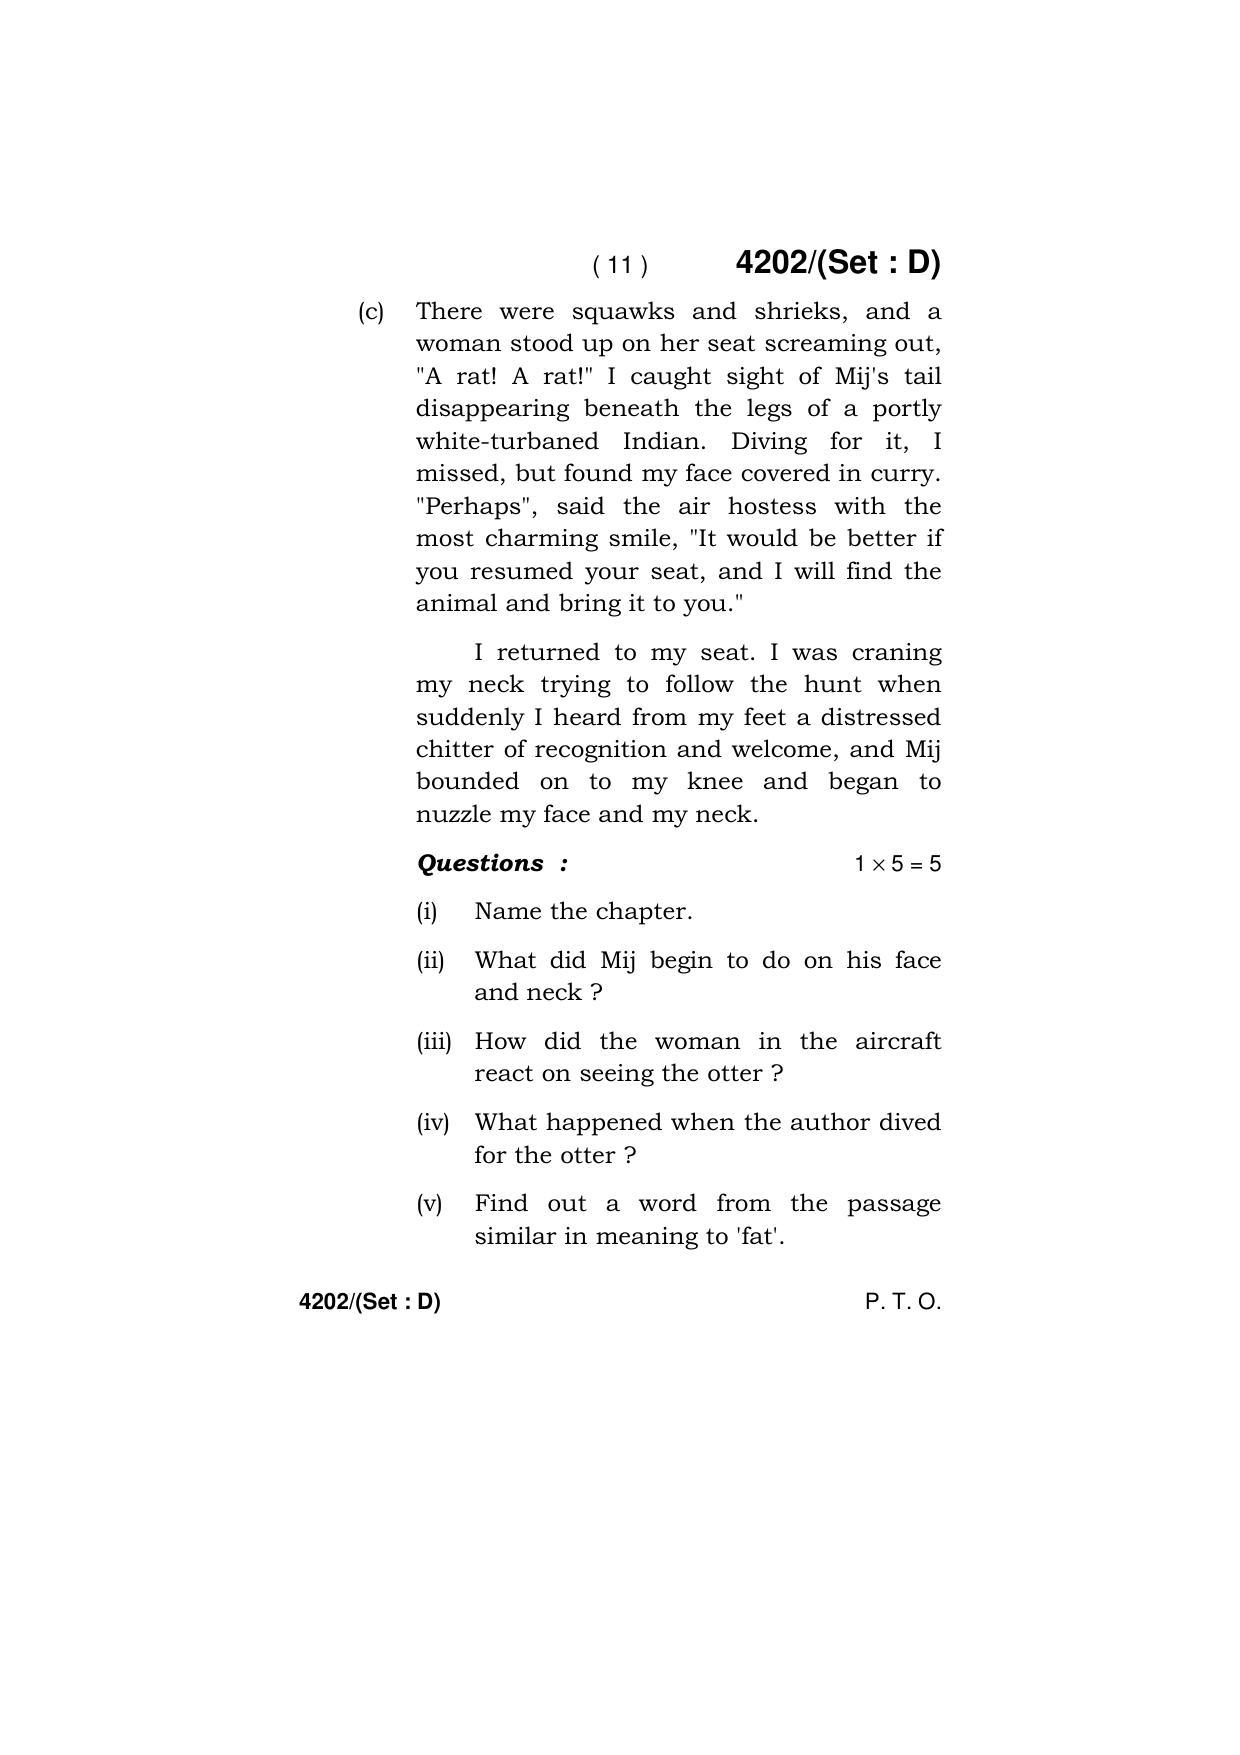 Haryana Board HBSE Class 10 English (All Set) 2019 Question Paper - Page 59